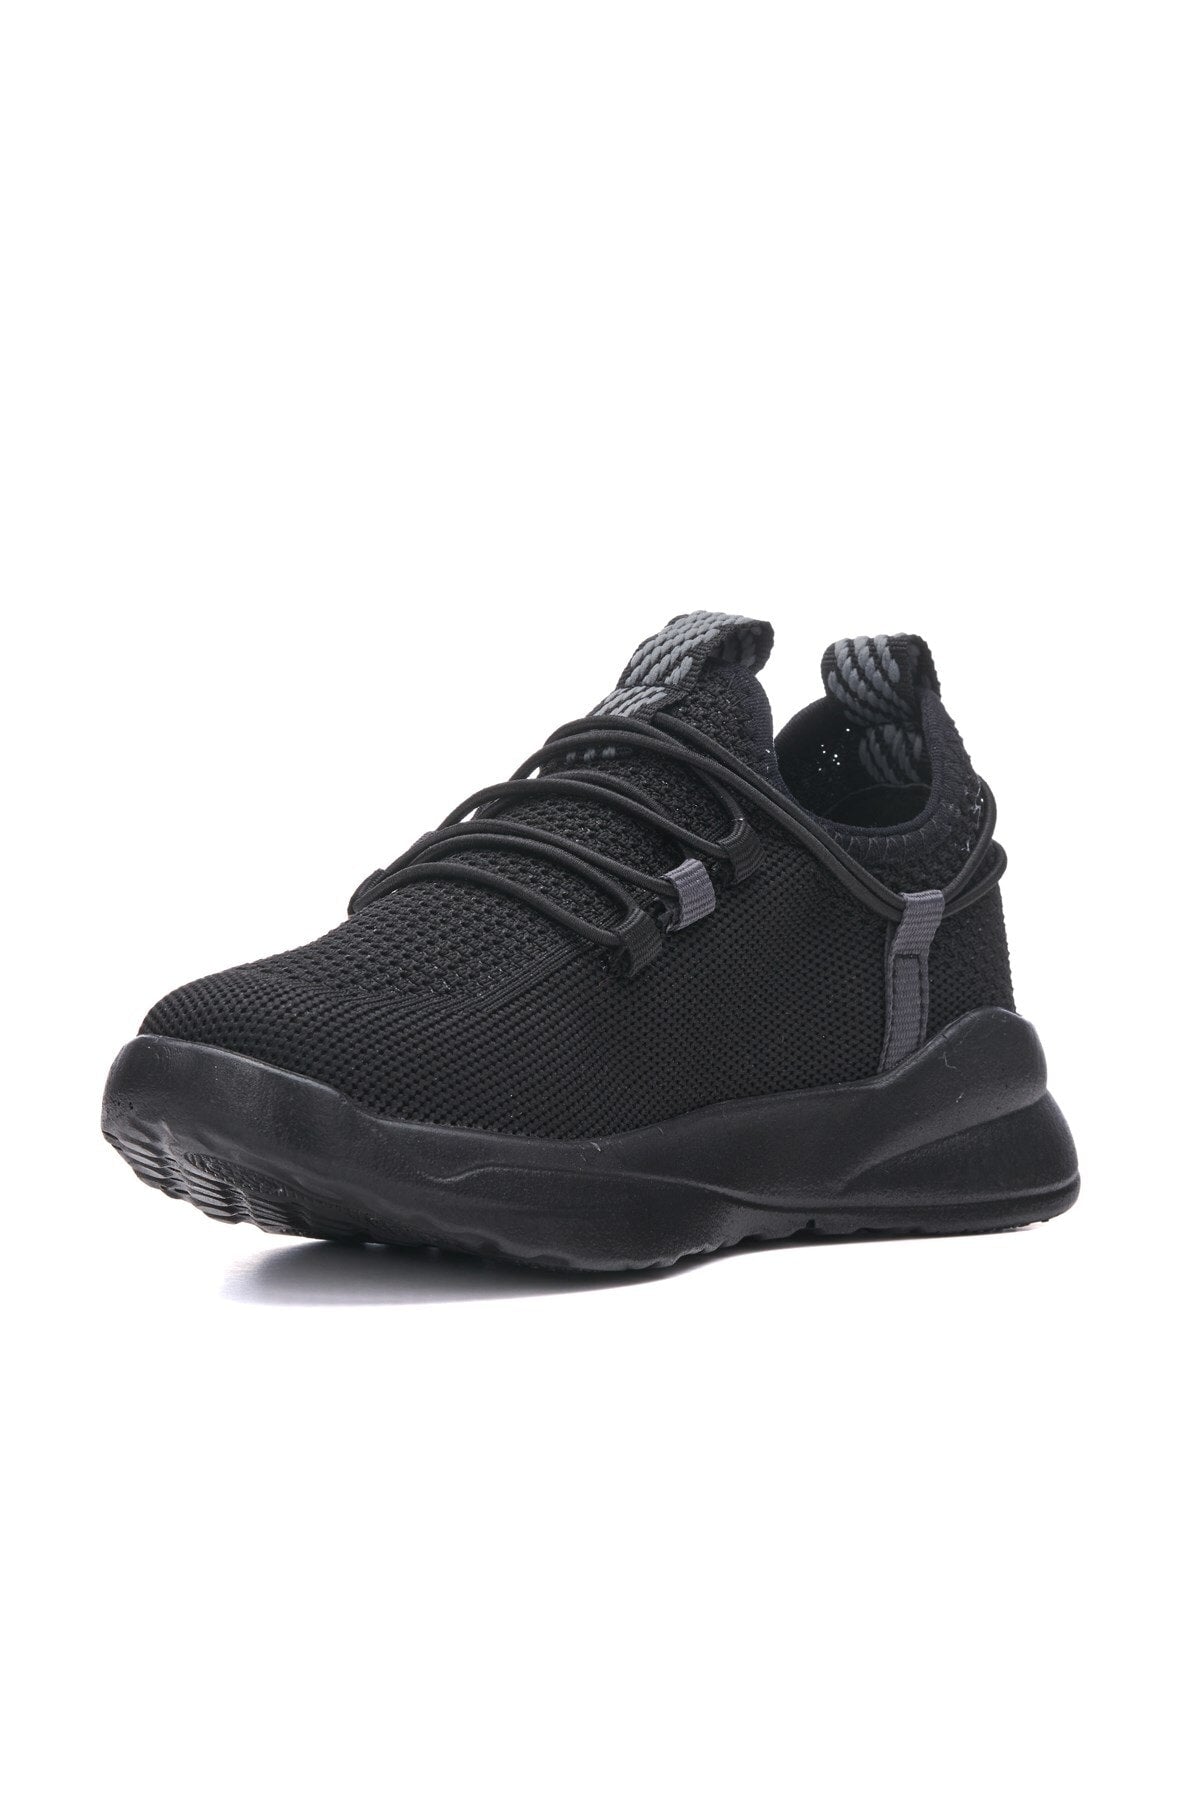 Black - Child Light Sneakers Flexible Laced Daily Casual Sneaker 4017